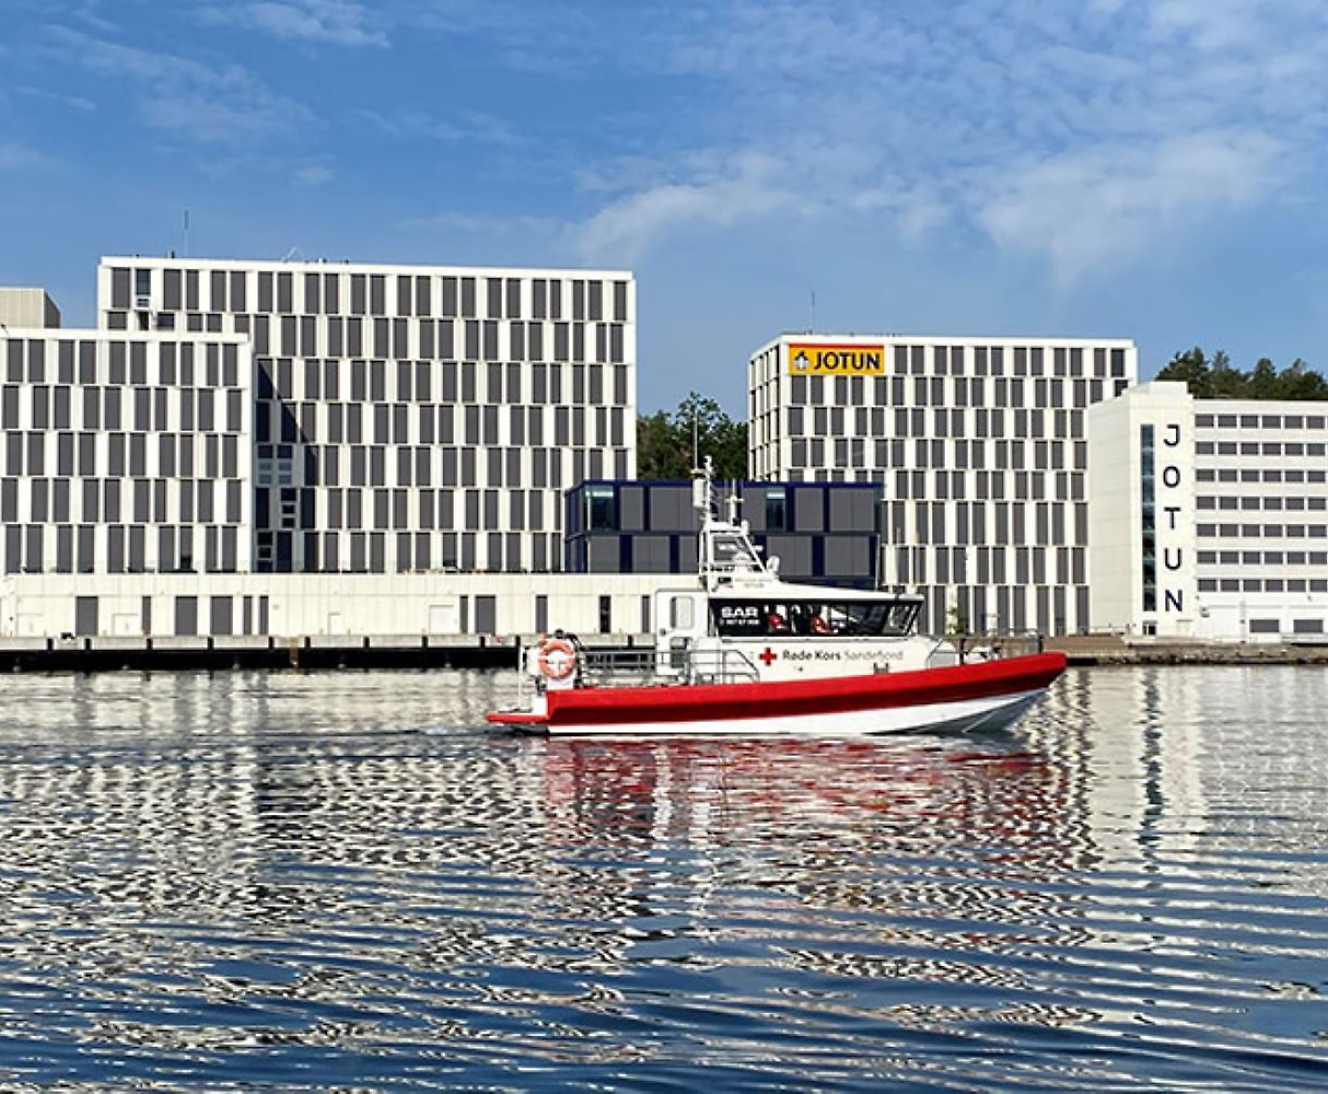 A red pilot boat on the water in front of modern waterfront buildings with "jotun" signage.